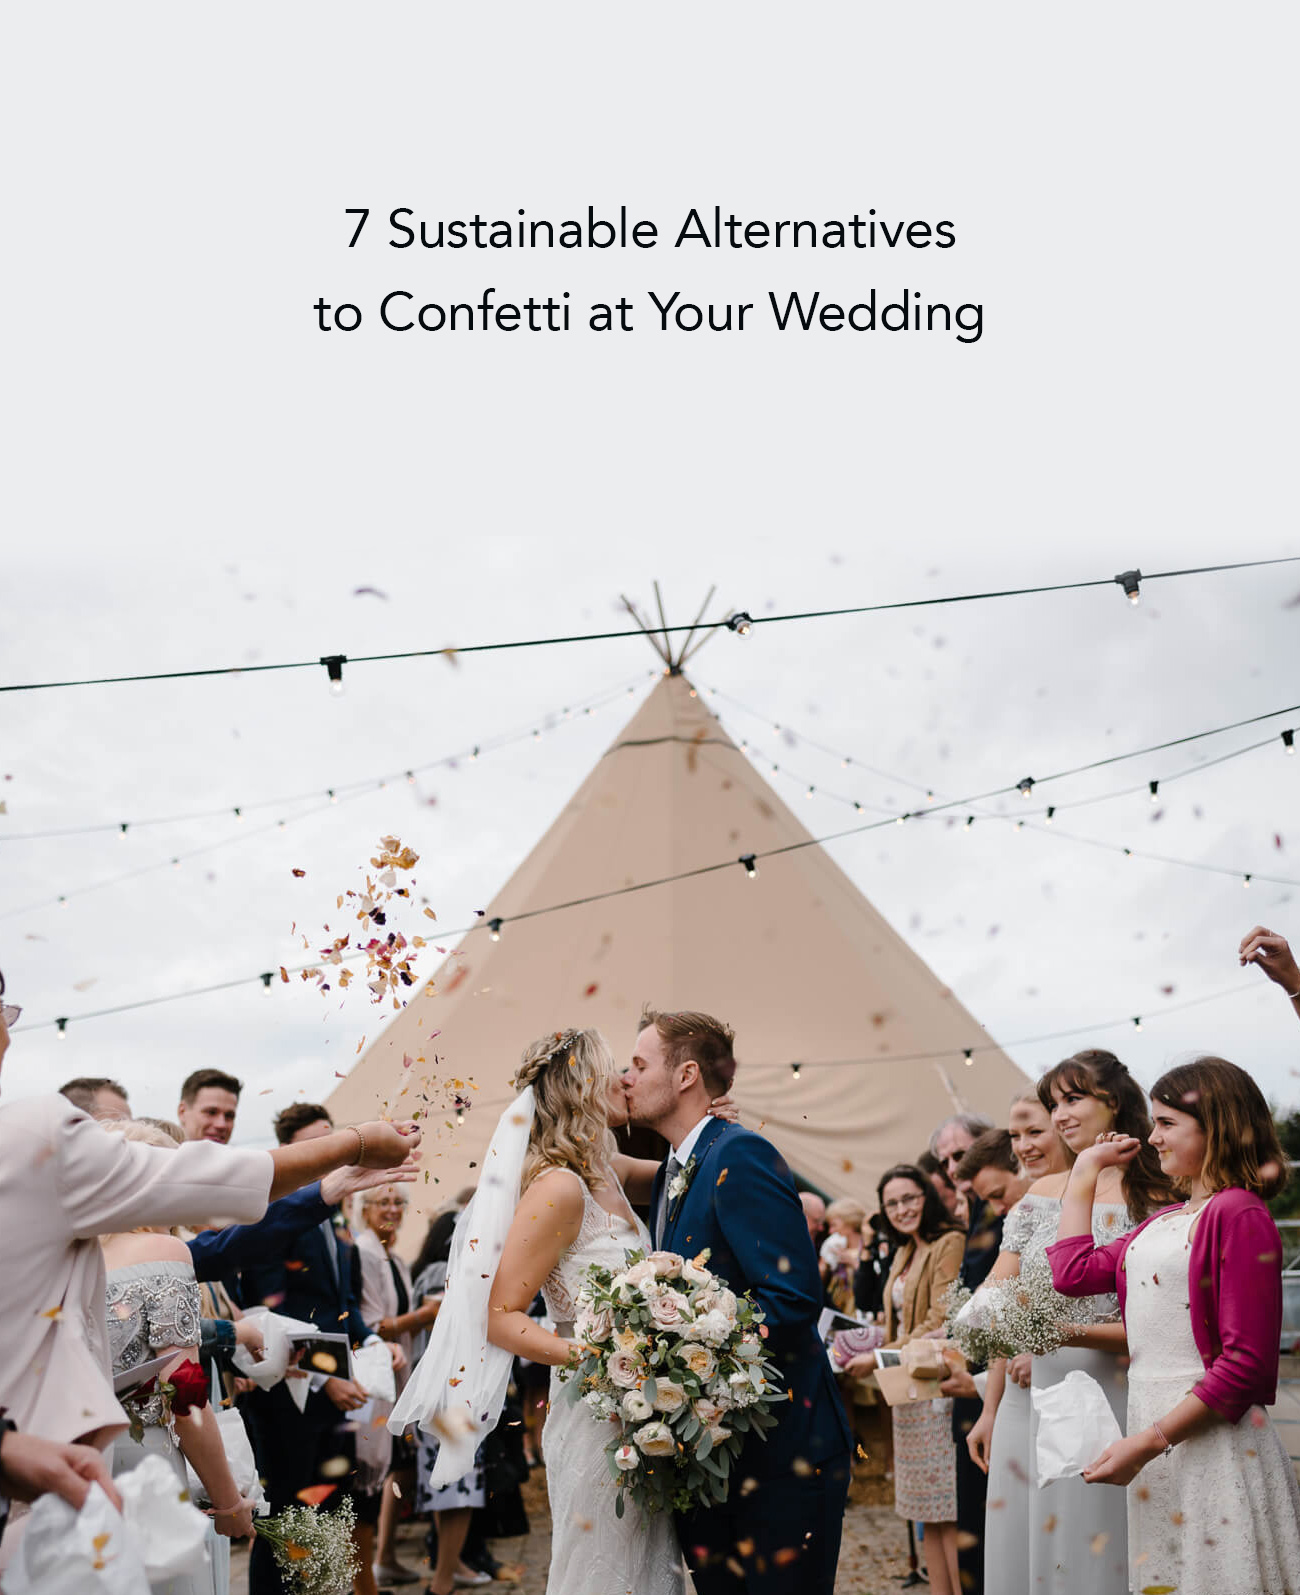 7 Sustainable Alternatives to Confetti at your Wedding